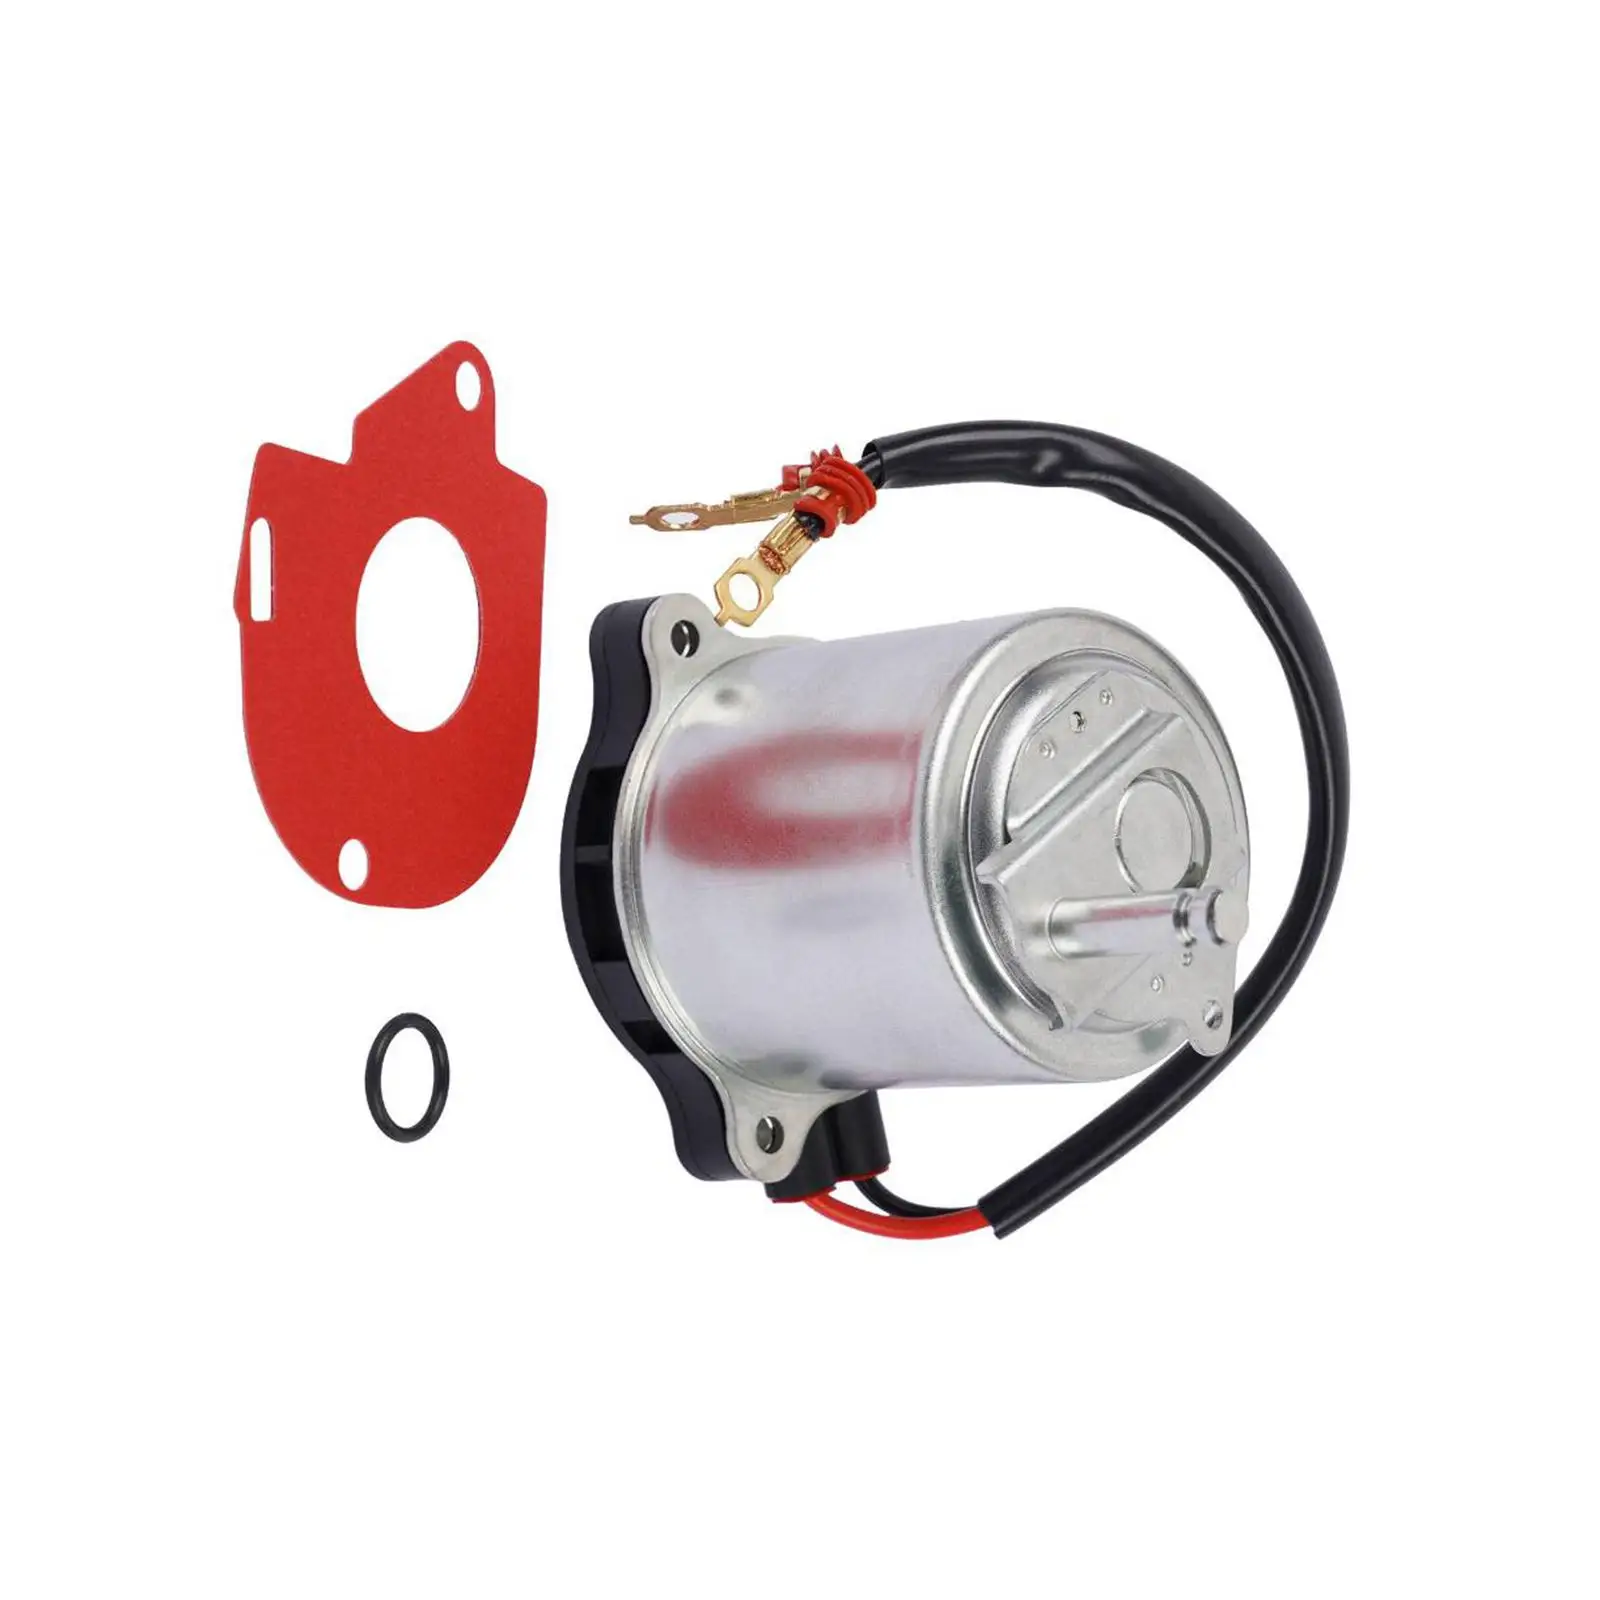 Brake Booster Pump Motor Replace Parts 47960 60050 Accessories Easy to Install High Quality for Gx470 LX450D Gx460 LX570